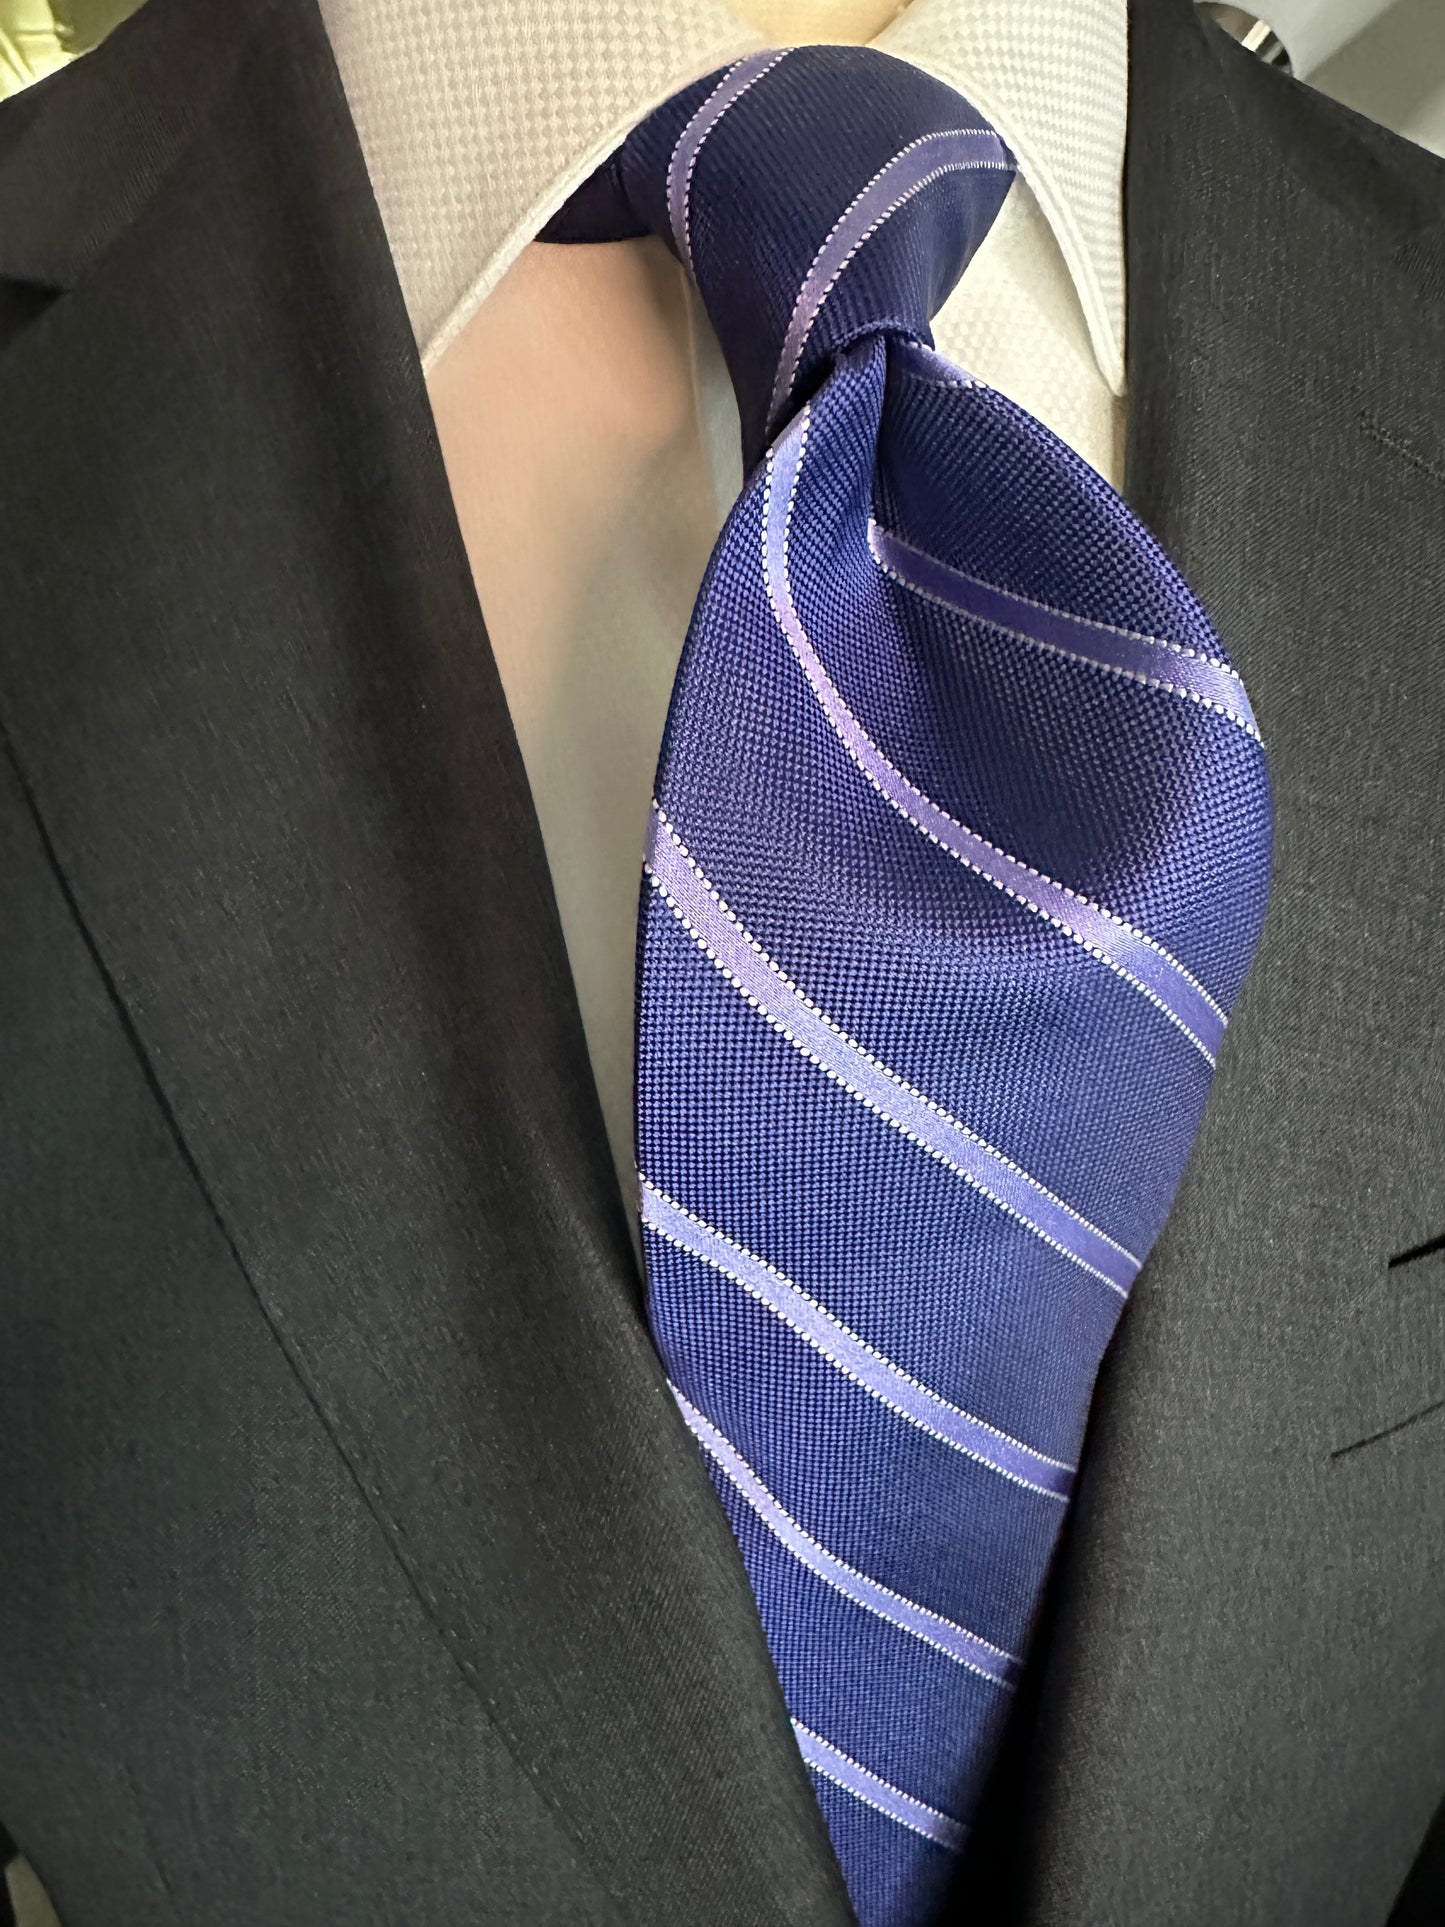 This 100% silk necktie in ink blue with lavender stripe is a very sophisticated Italian tie to be worn with suits or sports jackets. This tie can be very formal with a charcoal grey or navy suit in a classic sense or can be a more casual look with a plaid jacket, light grey trousers and brown suede loafers. 